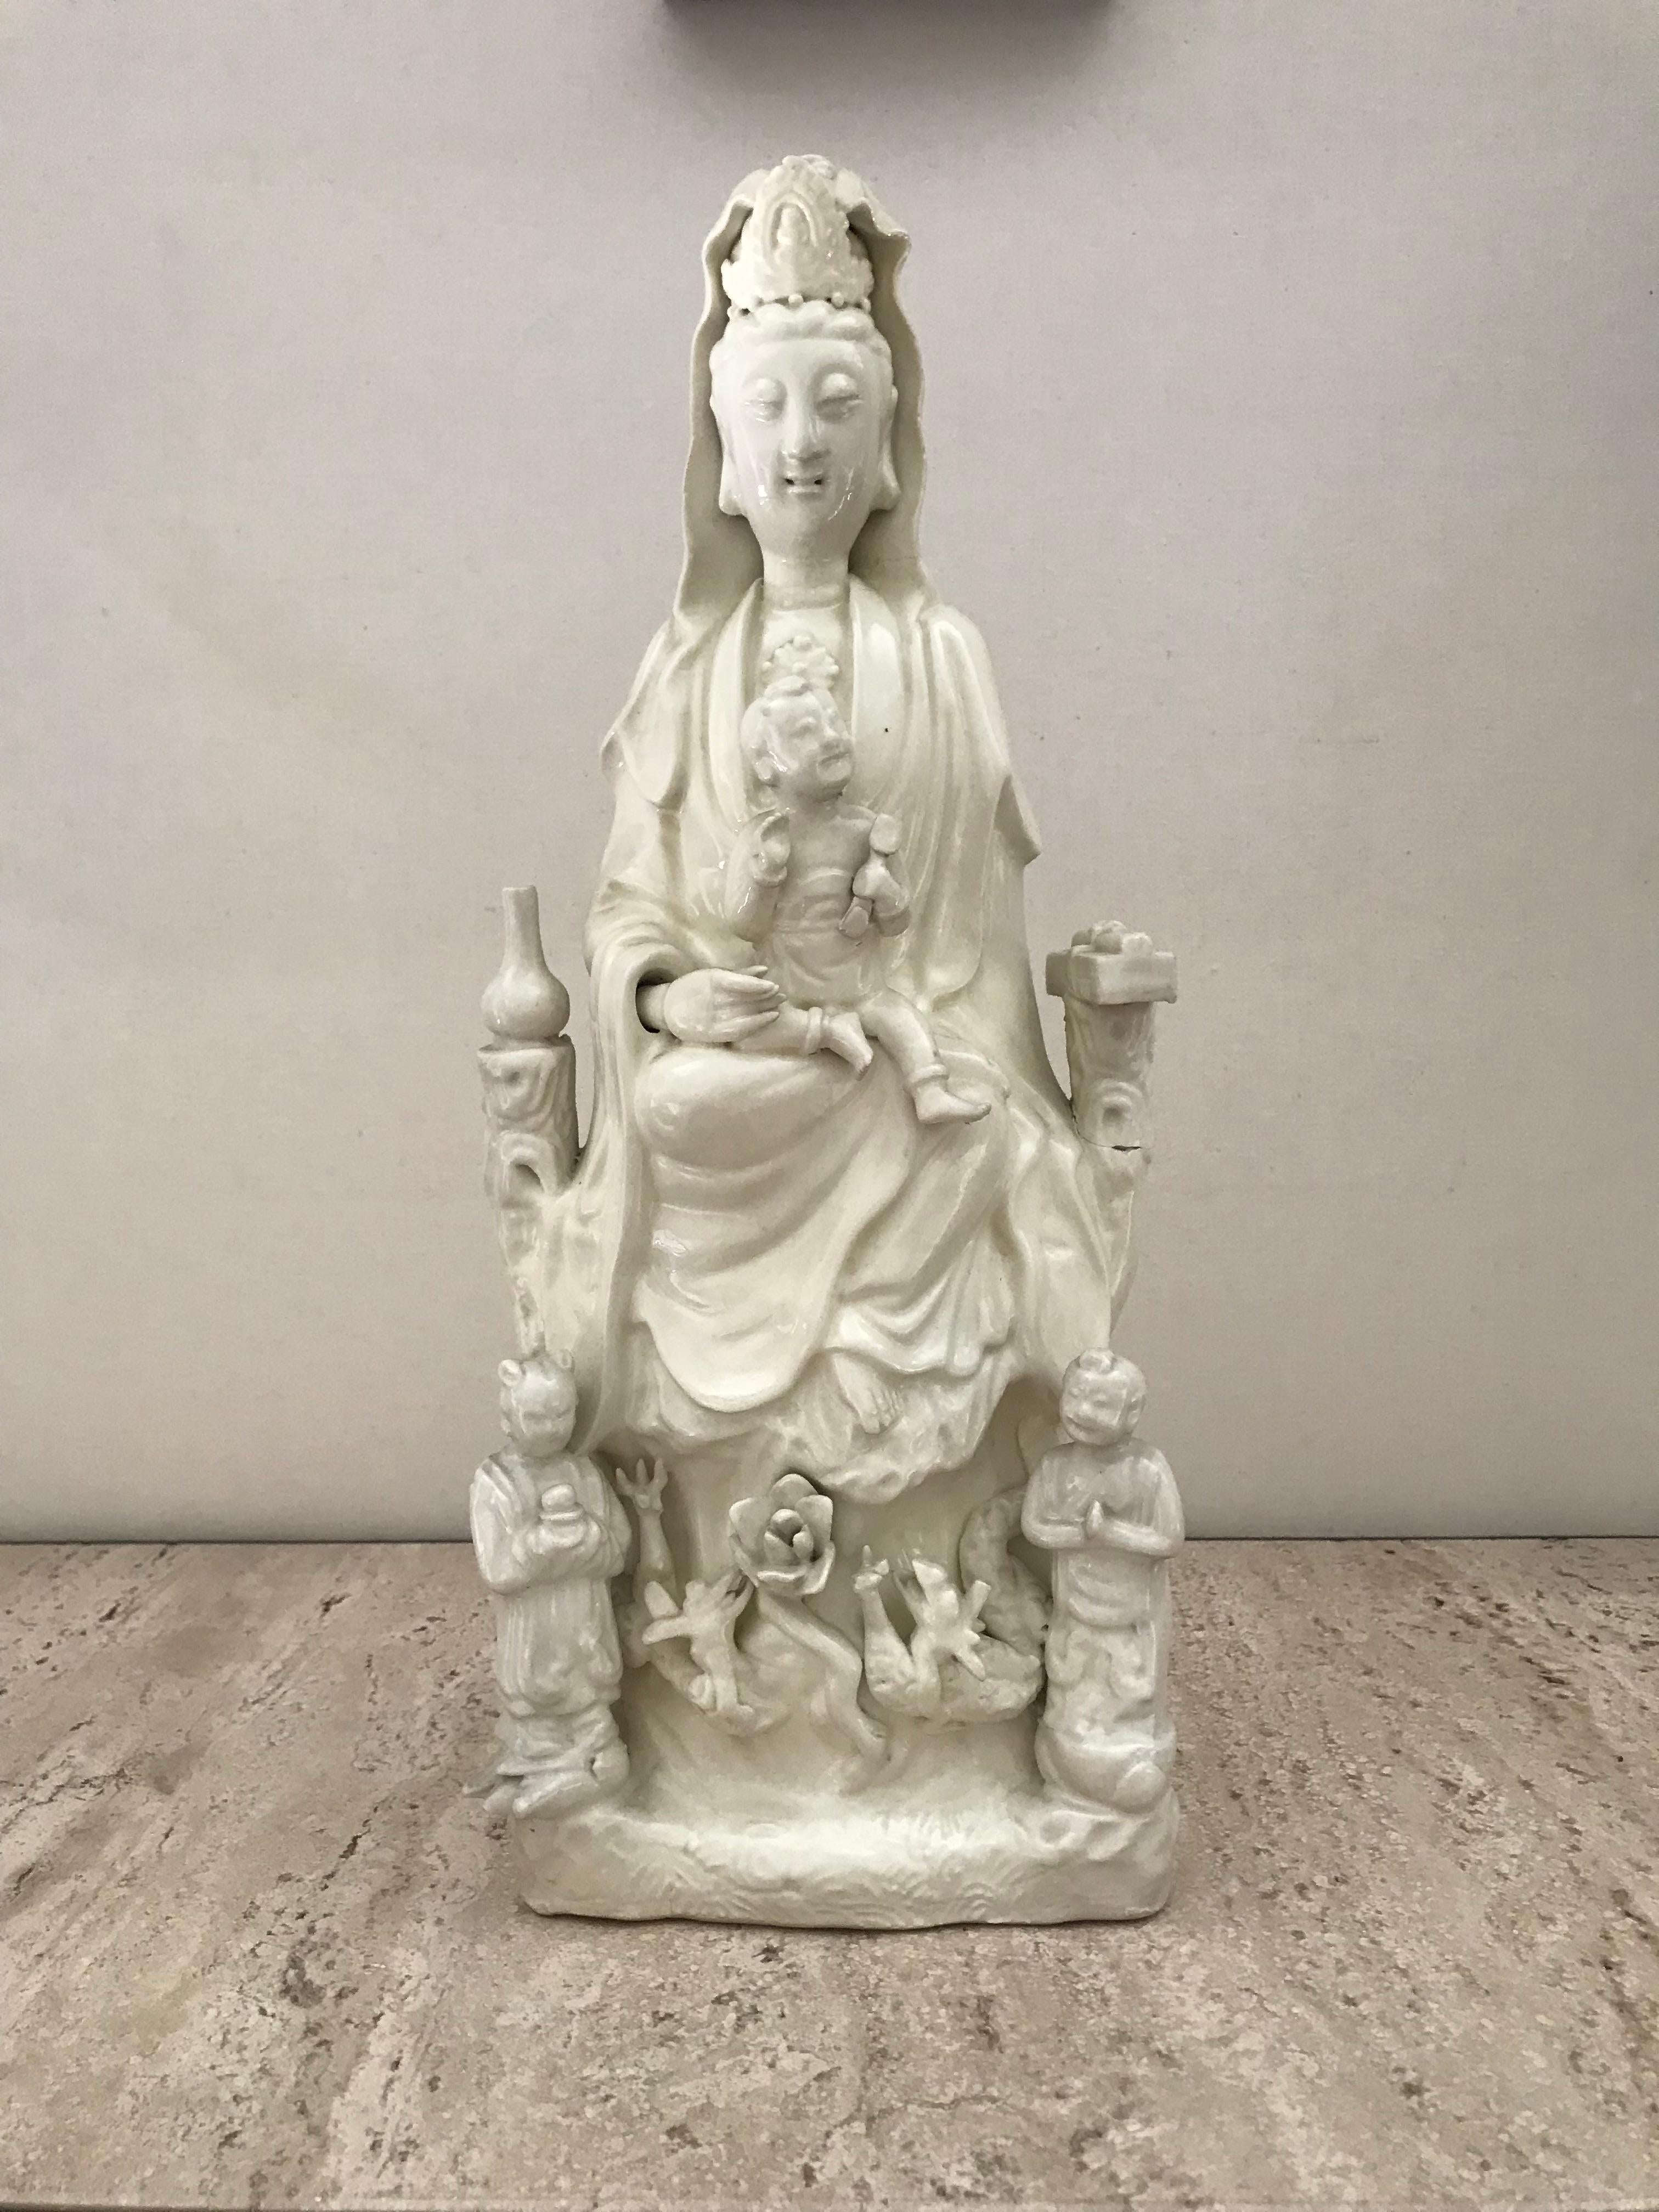 Chinise blanc-de-chine figure of Guanyin

The goodness seated on a rockwork base applied with a pair of dragons and a lotus head, with a young boy on her knee, flanked by two acolytes, a book and a pear shaped vase.
Some damages and old repairs.